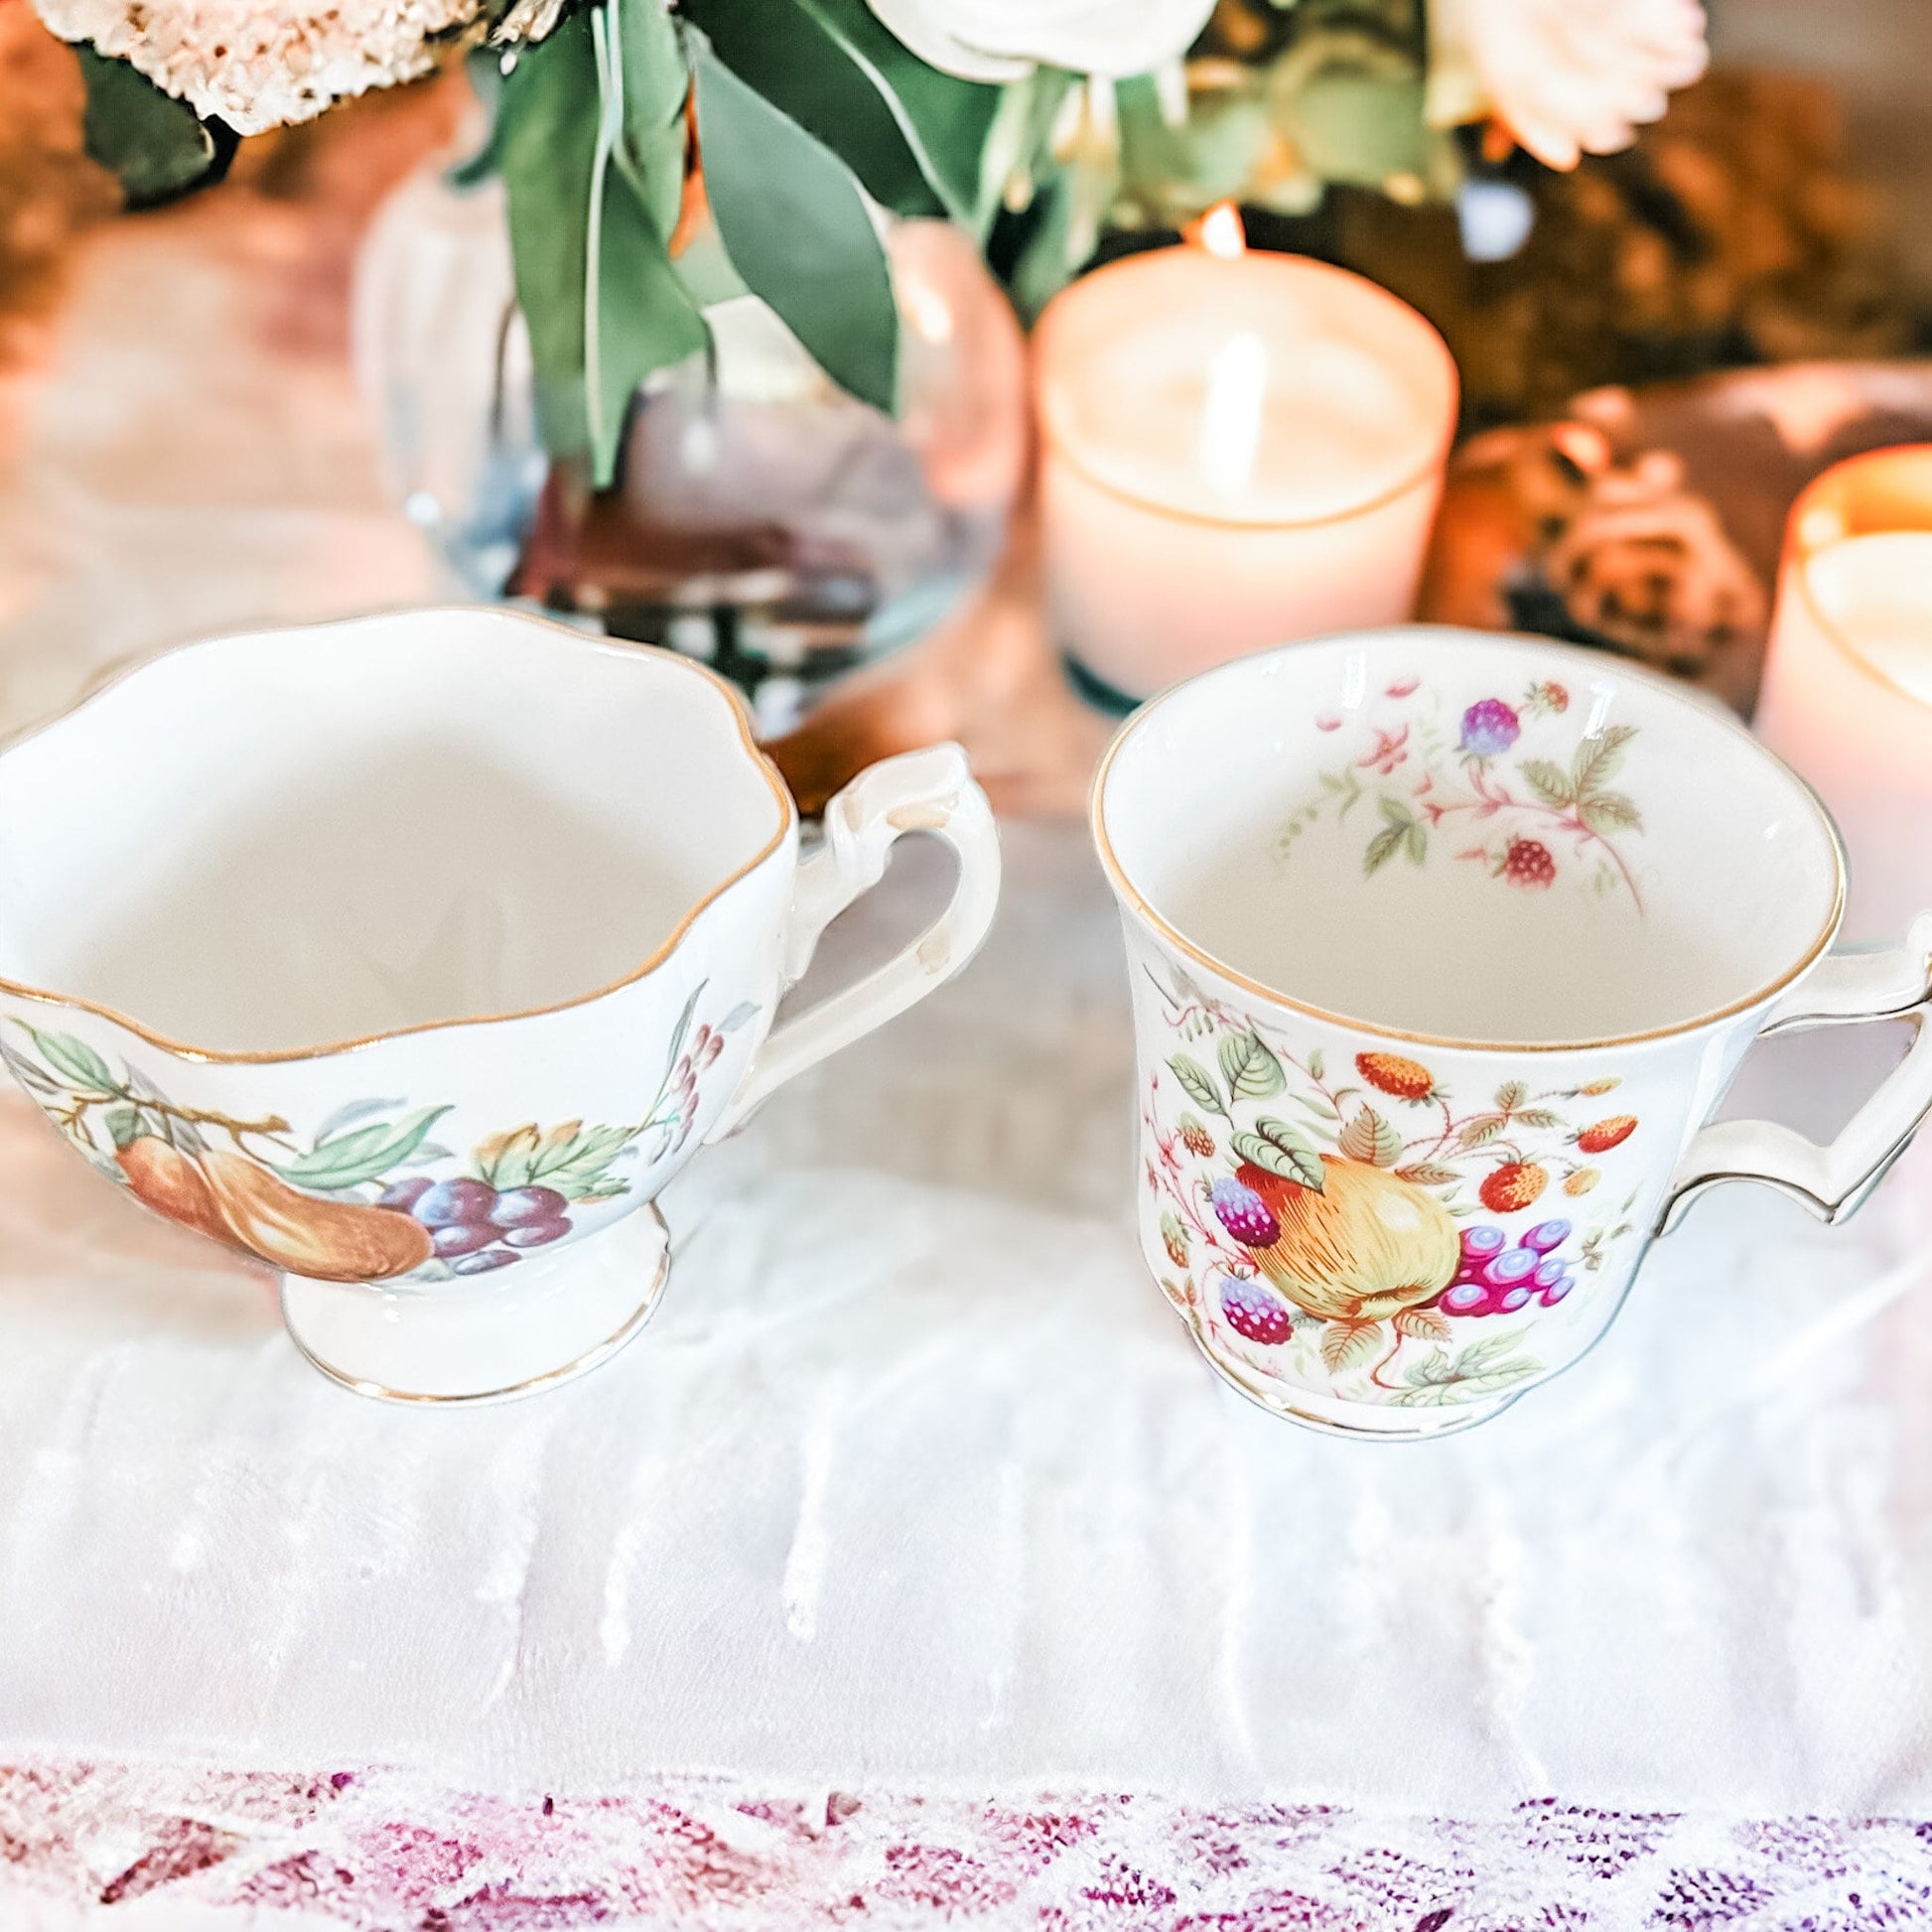 Scented Candle, Vintage, China, Teacup, Best Friend Gifts